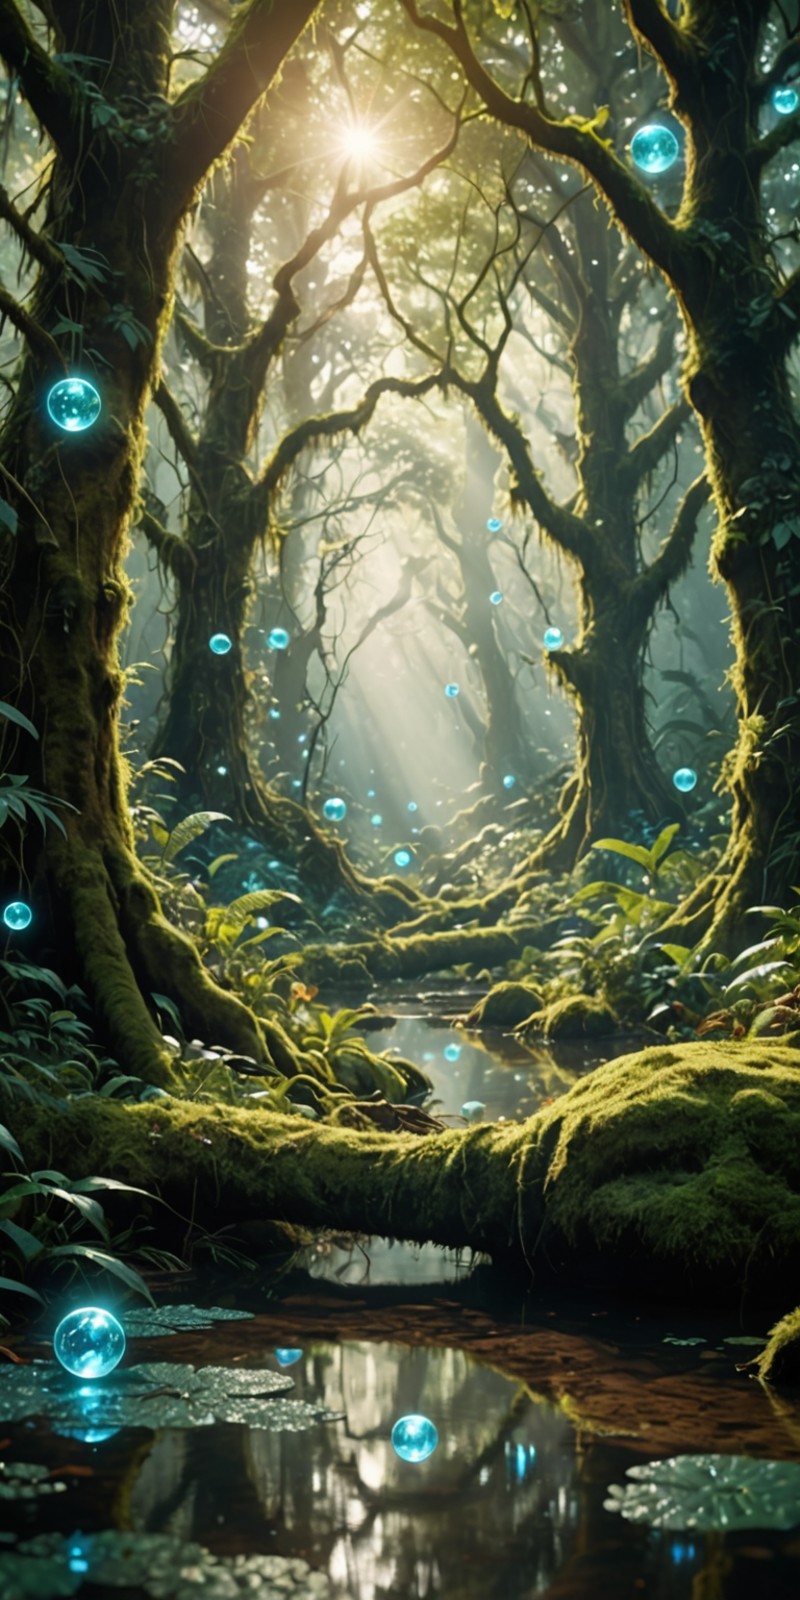 A moss-covered ancient forest bathed in soft sunlight. Scattered throughout the undergrowth are glowing blue orbs that reflect in the still water of a small lily pad lined puddles that dot the forest floor.